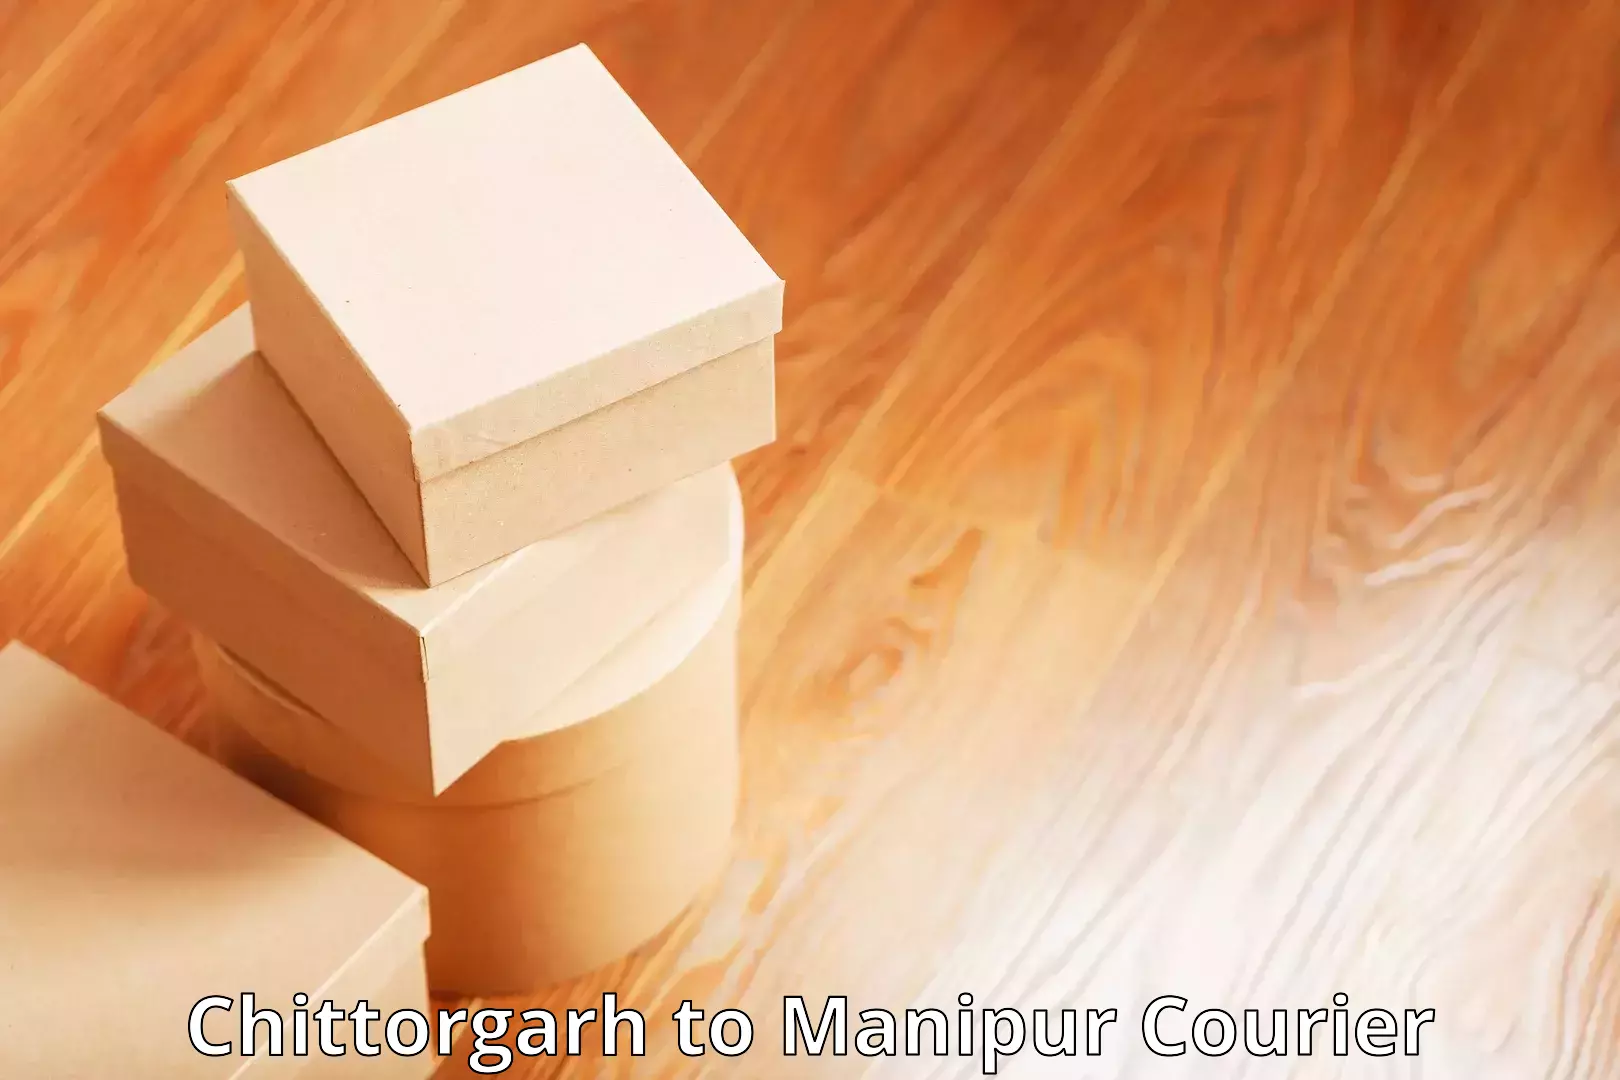 State-of-the-art courier technology Chittorgarh to Moirang